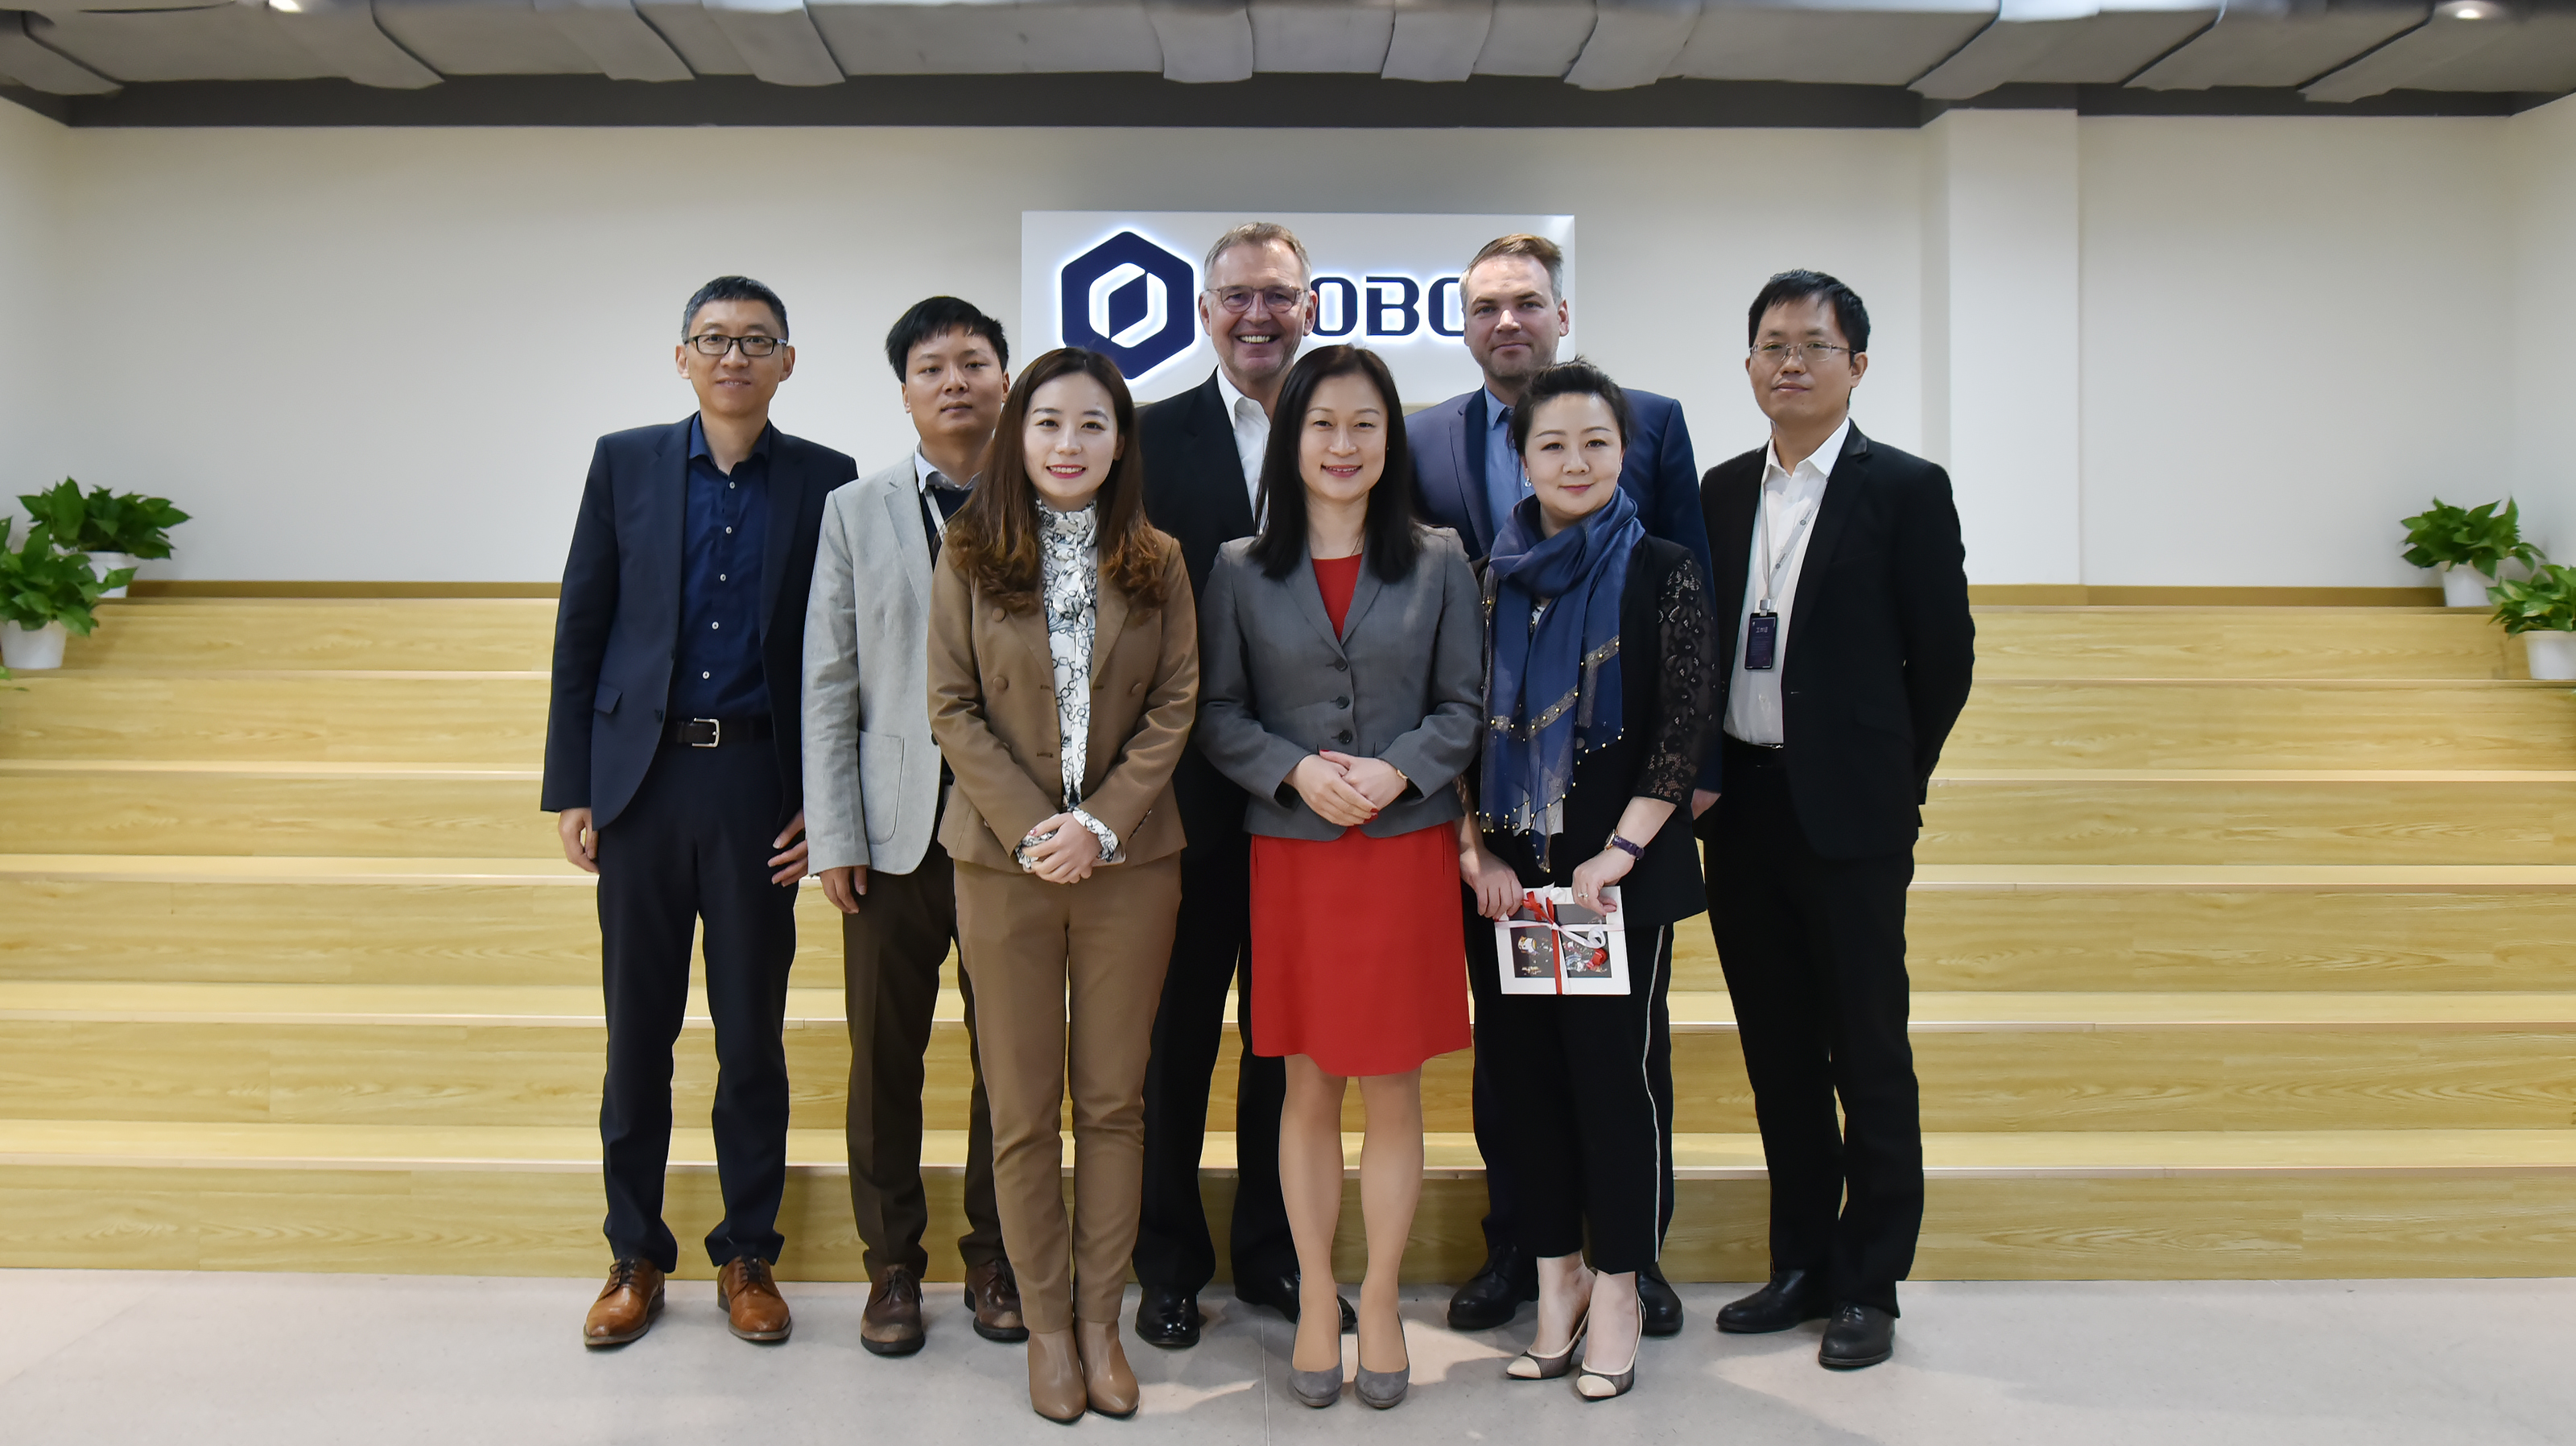 Delegation of Nuremberg Chamber of Commerce and Industry Visits Dobot’s HQ